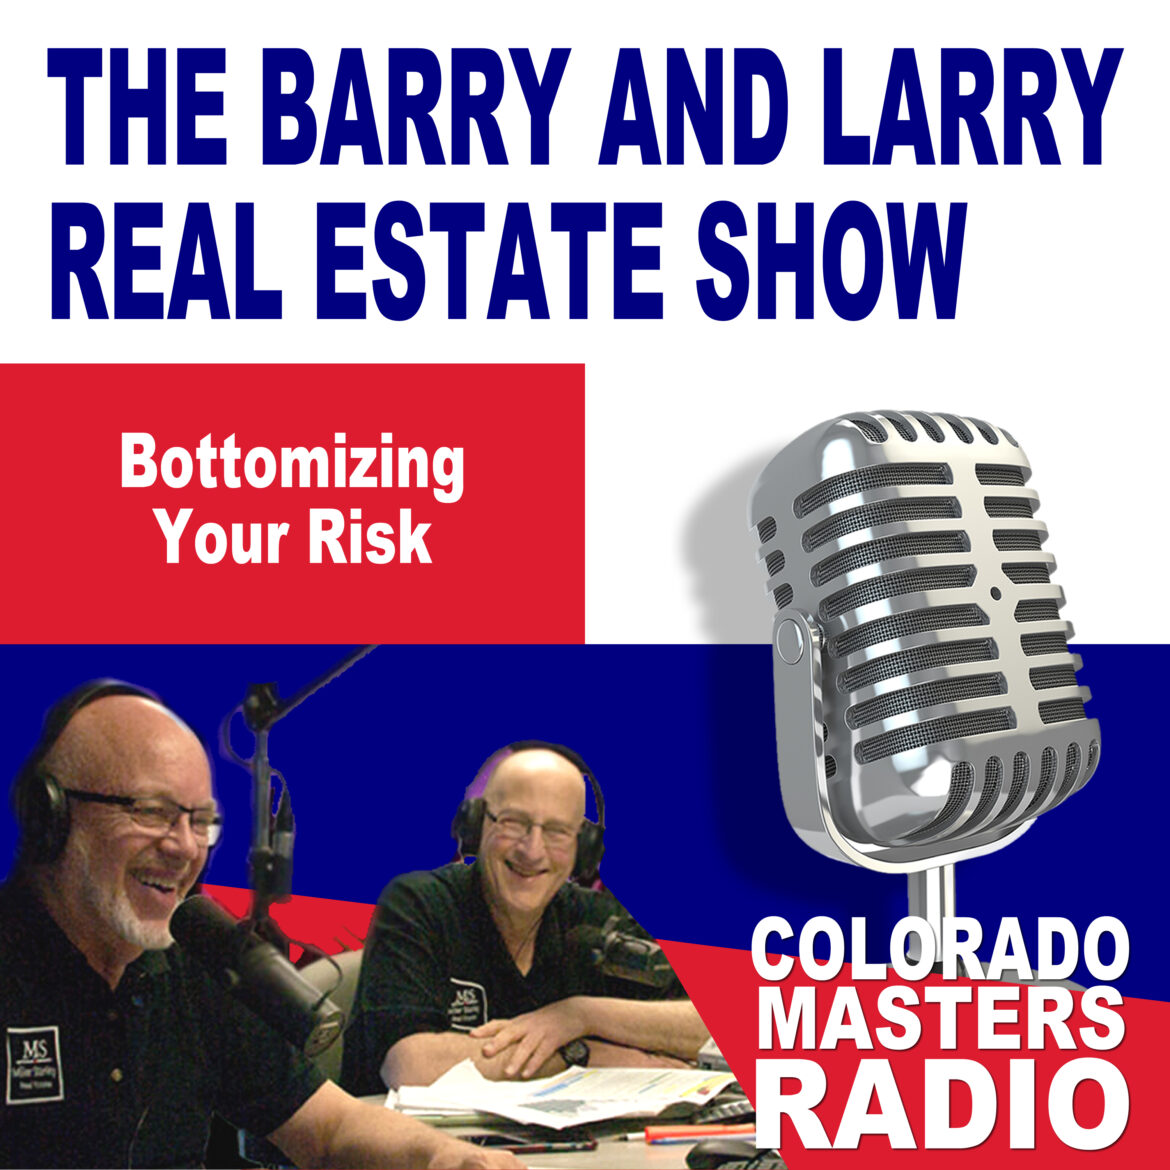 The Larry and Barry Real Estate Show - Bottomizing Your Risk